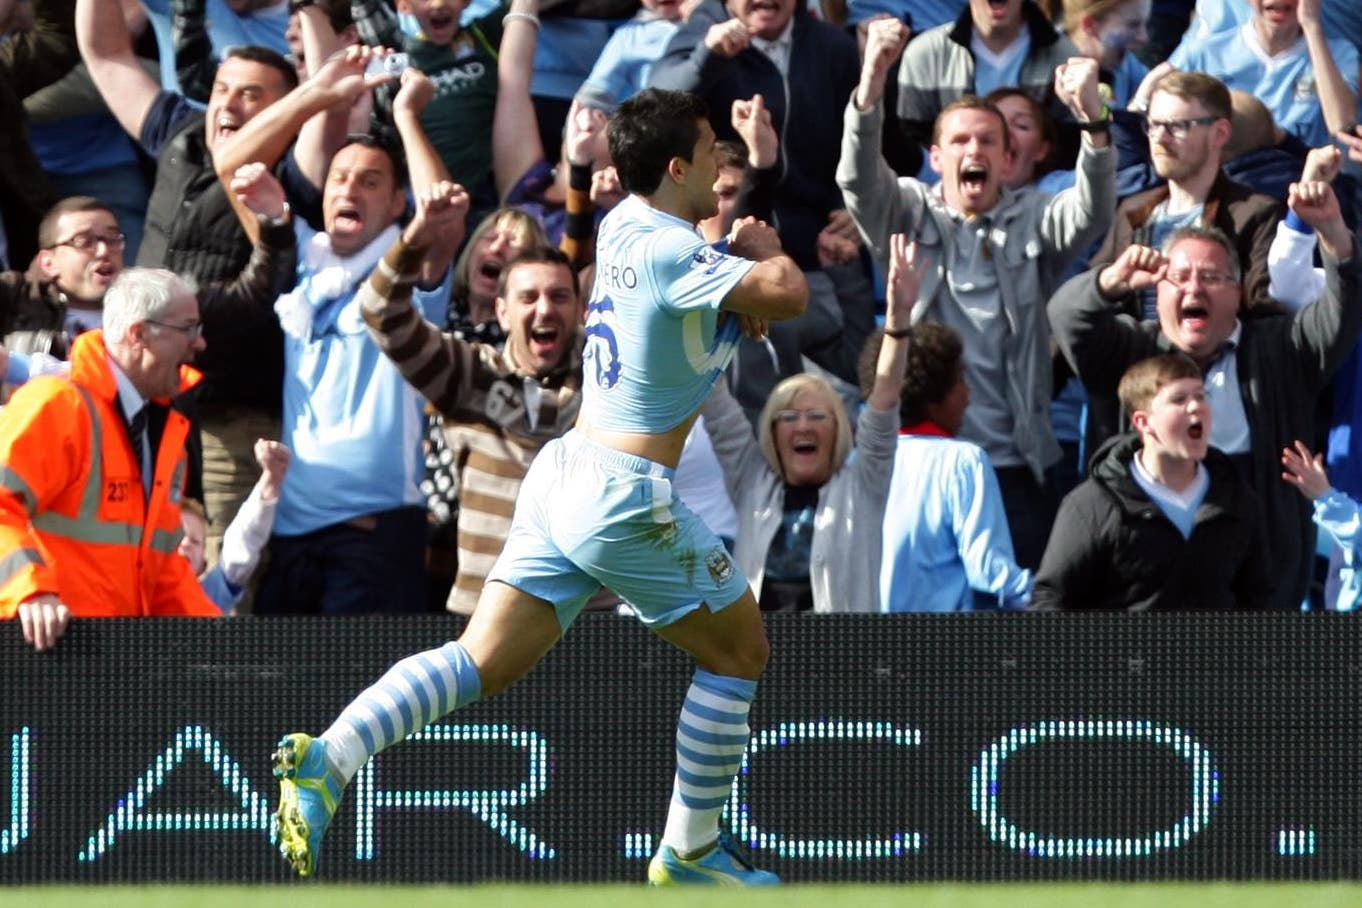 Manchester City’s Sergio Aguero celebrates scoring the title-winning goal in stoppage time (Dave Thompson/PA)